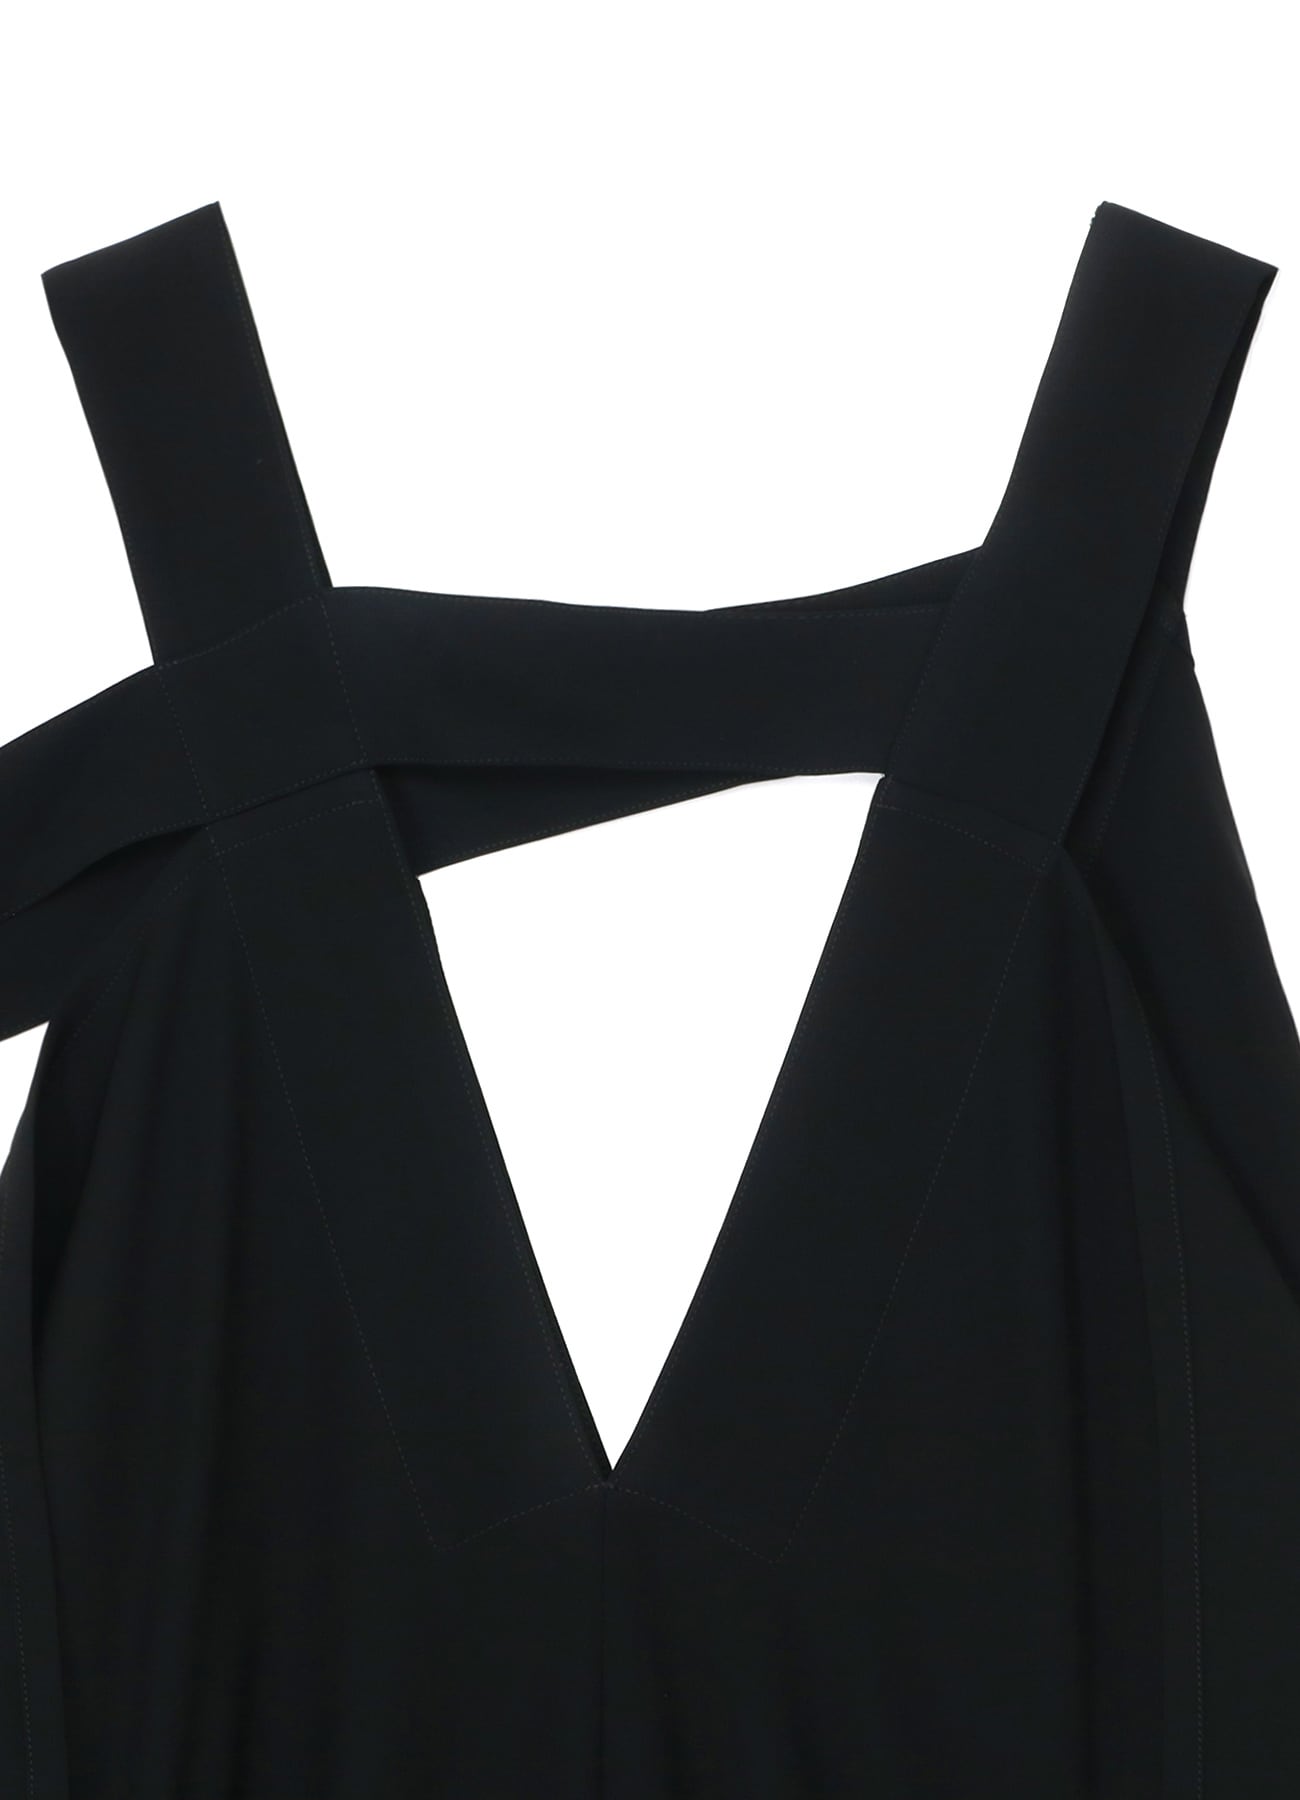 SQUARED DRESS WITH DOUBLE LAYER SATIN(S Black): LIMI feu